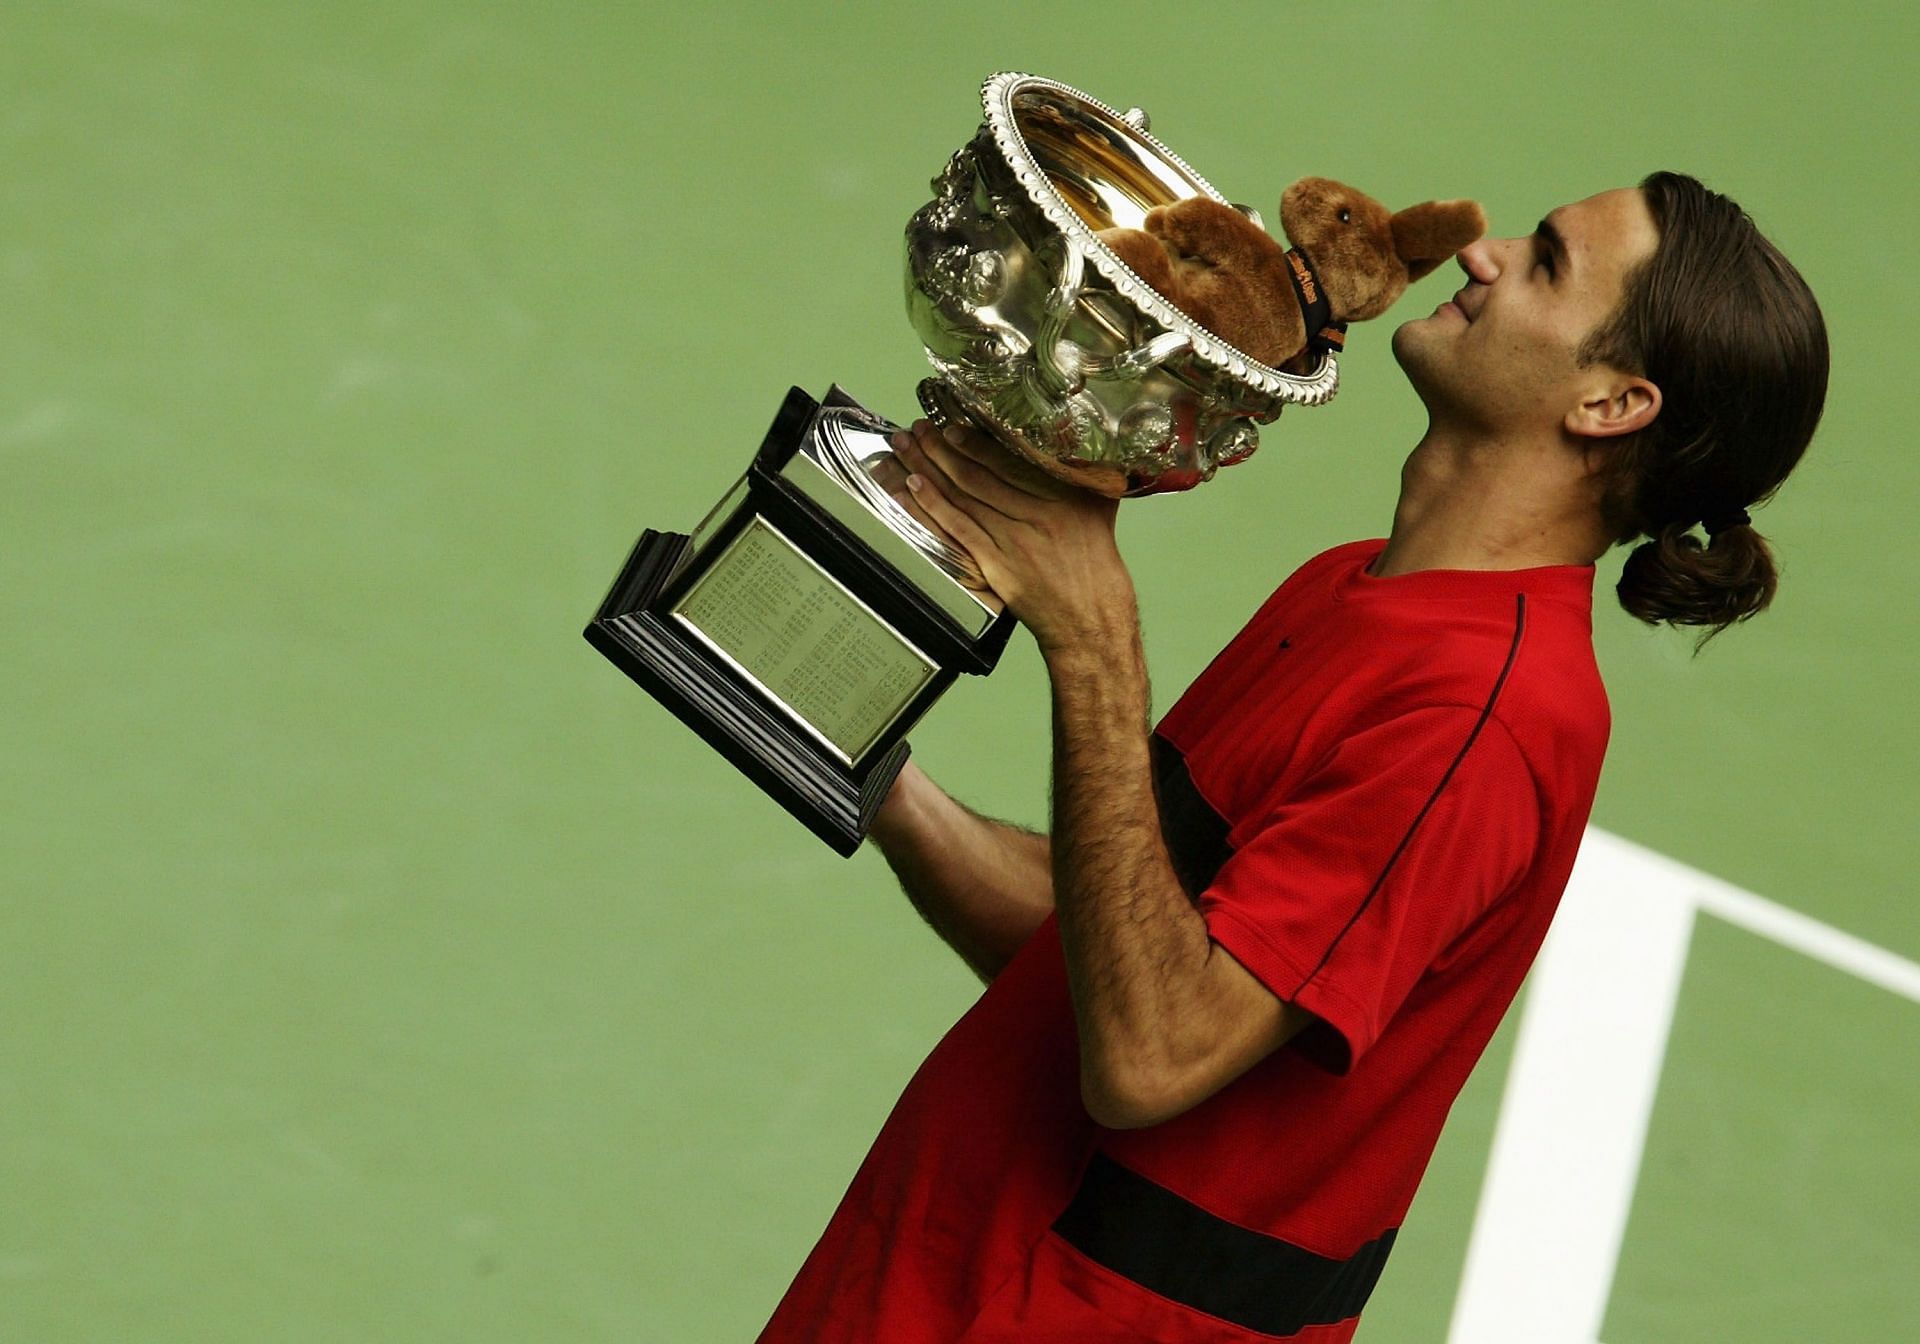 Roger Federer became the World No. 1 for the first time in his career in 2004